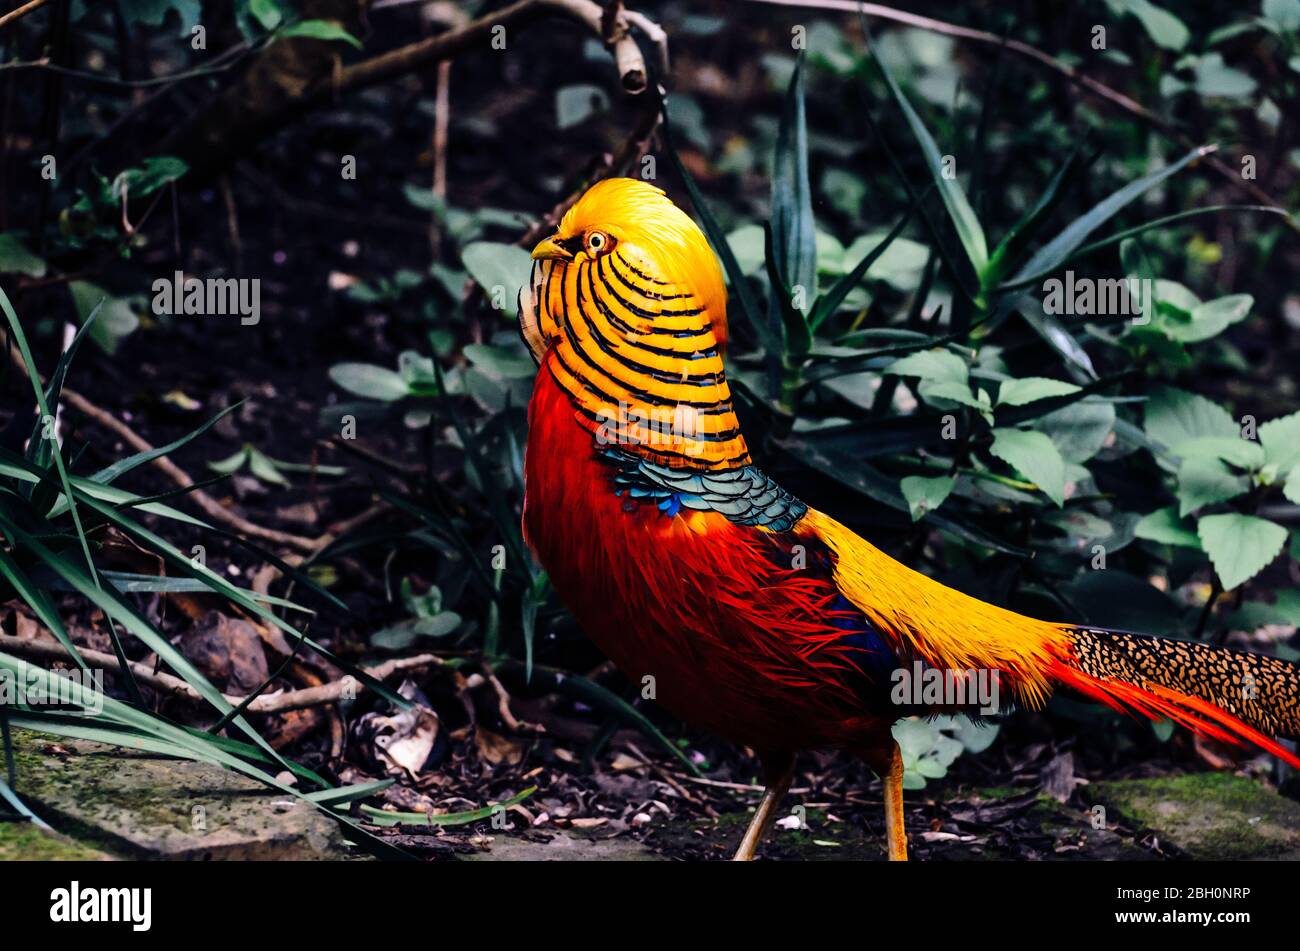 Golden pheasant (Chrysolophus pictus) at Birds of Eden Plettenberg  the world's largest free flight aviary and bird sanctuary South Africa Stock Photo